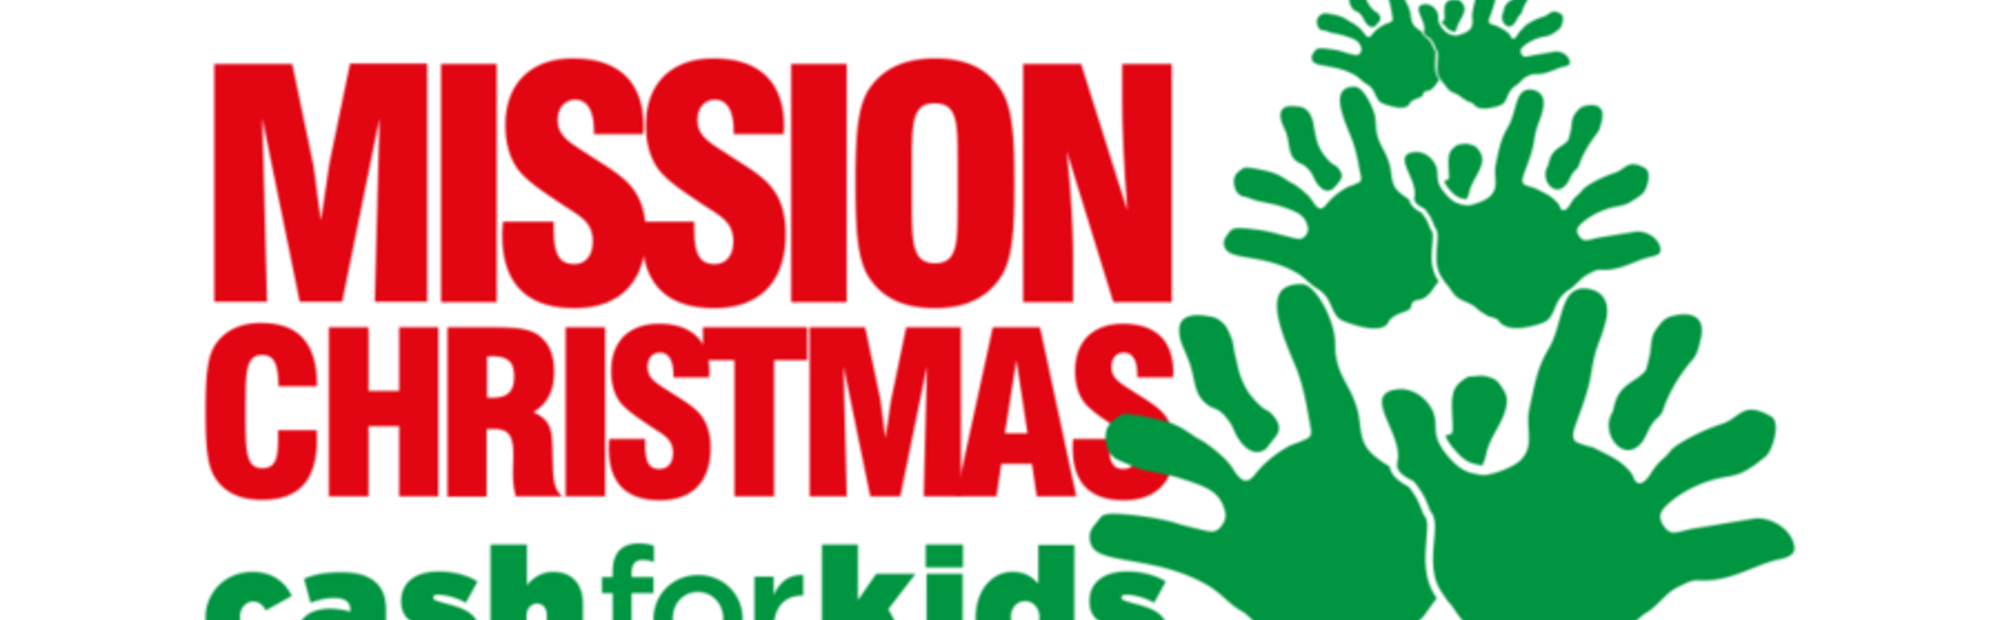 Friday is the last day to donate to Tay FM's Mission Christmas